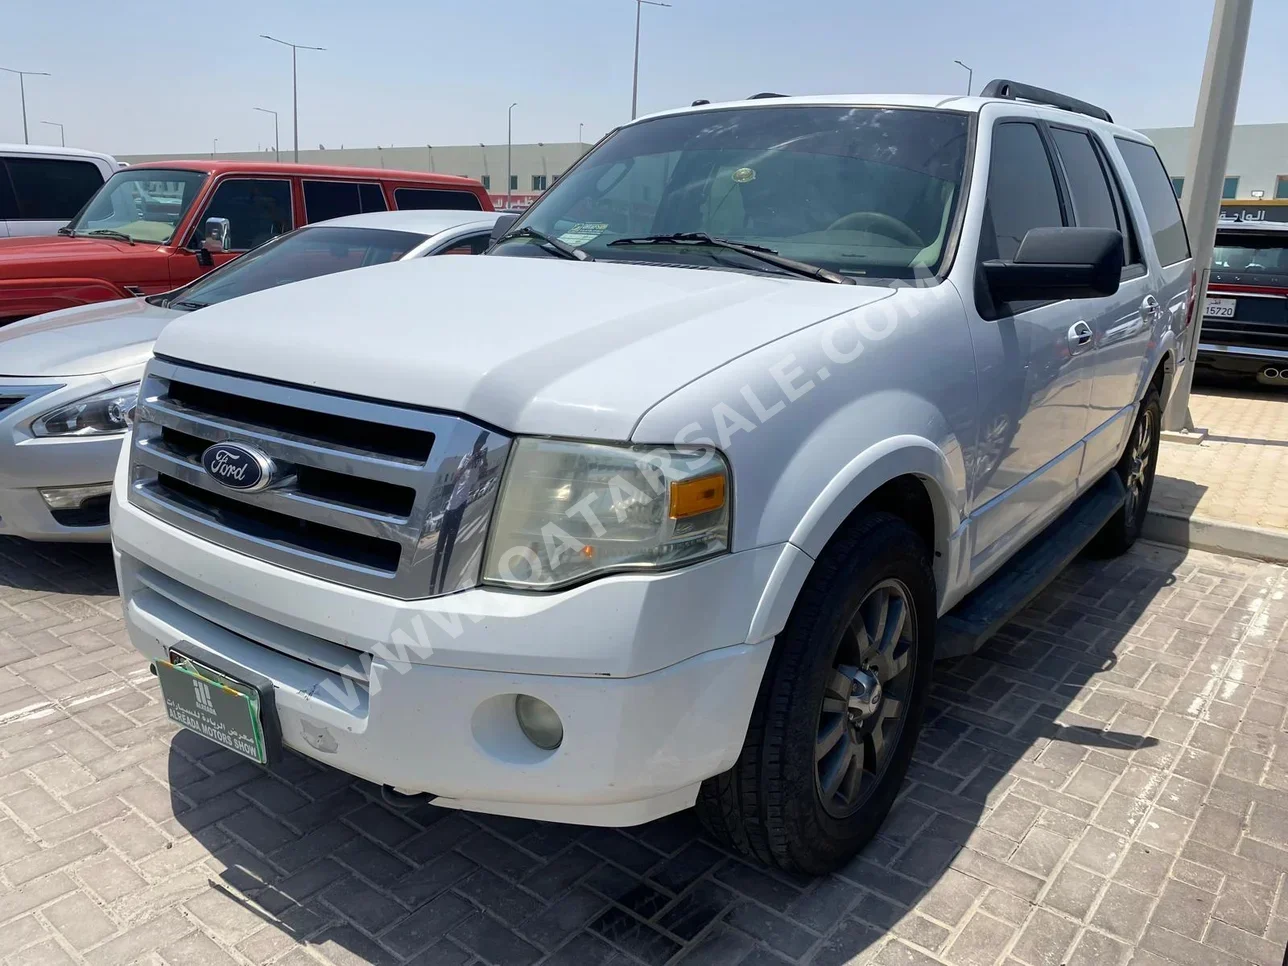 Ford  Expedition  XLT  2011  Automatic  208,000 Km  6 Cylinder  Four Wheel Drive (4WD)  SUV  White